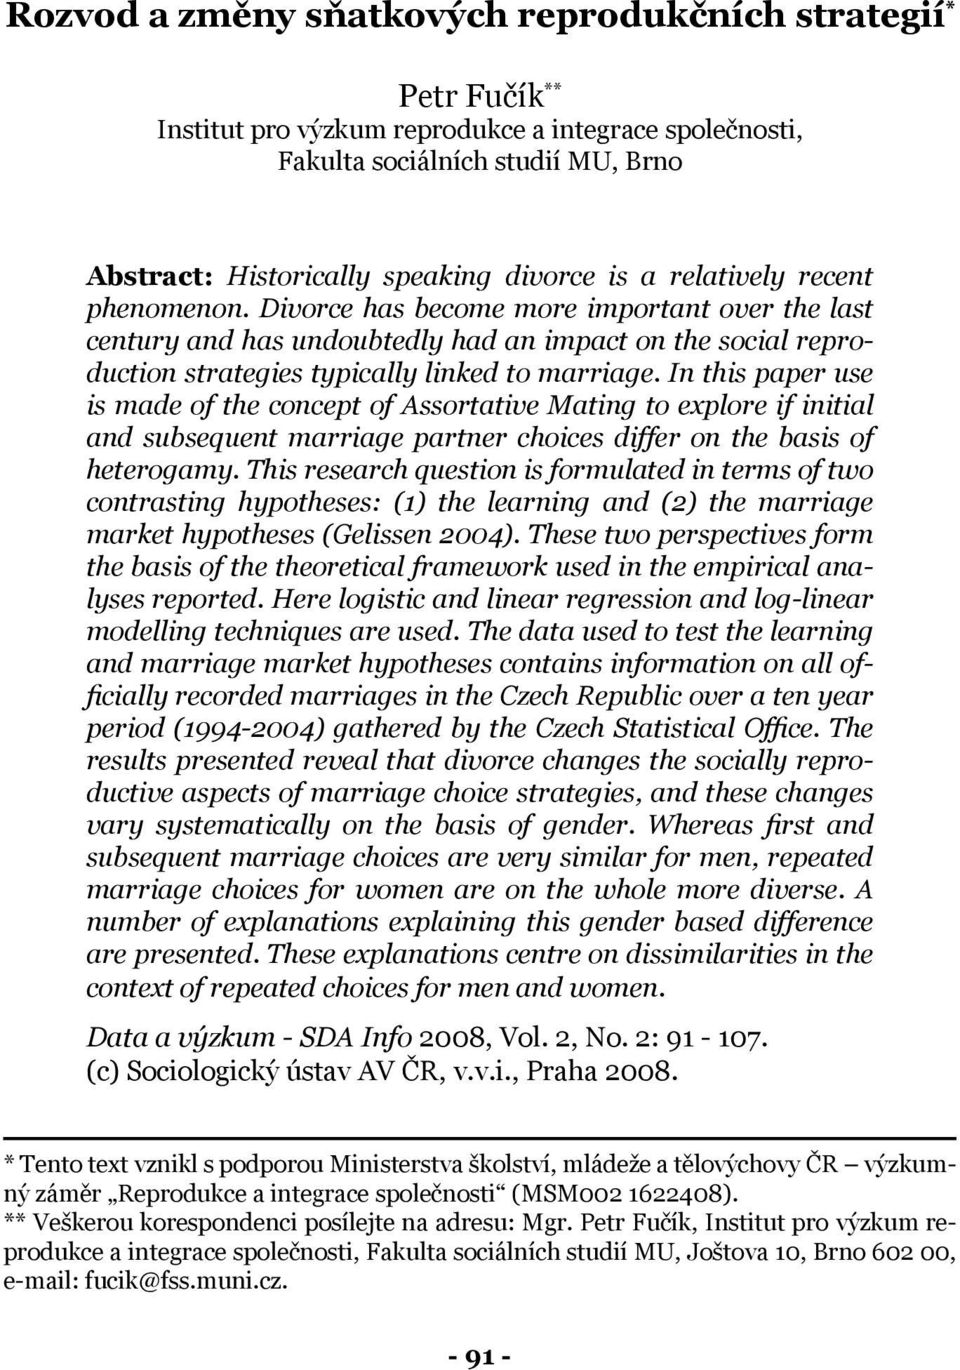 In this paper use is made of the concept of Assortative Mating to explore if initial and subsequent marriage partner choices differ on the basis of heterogamy.